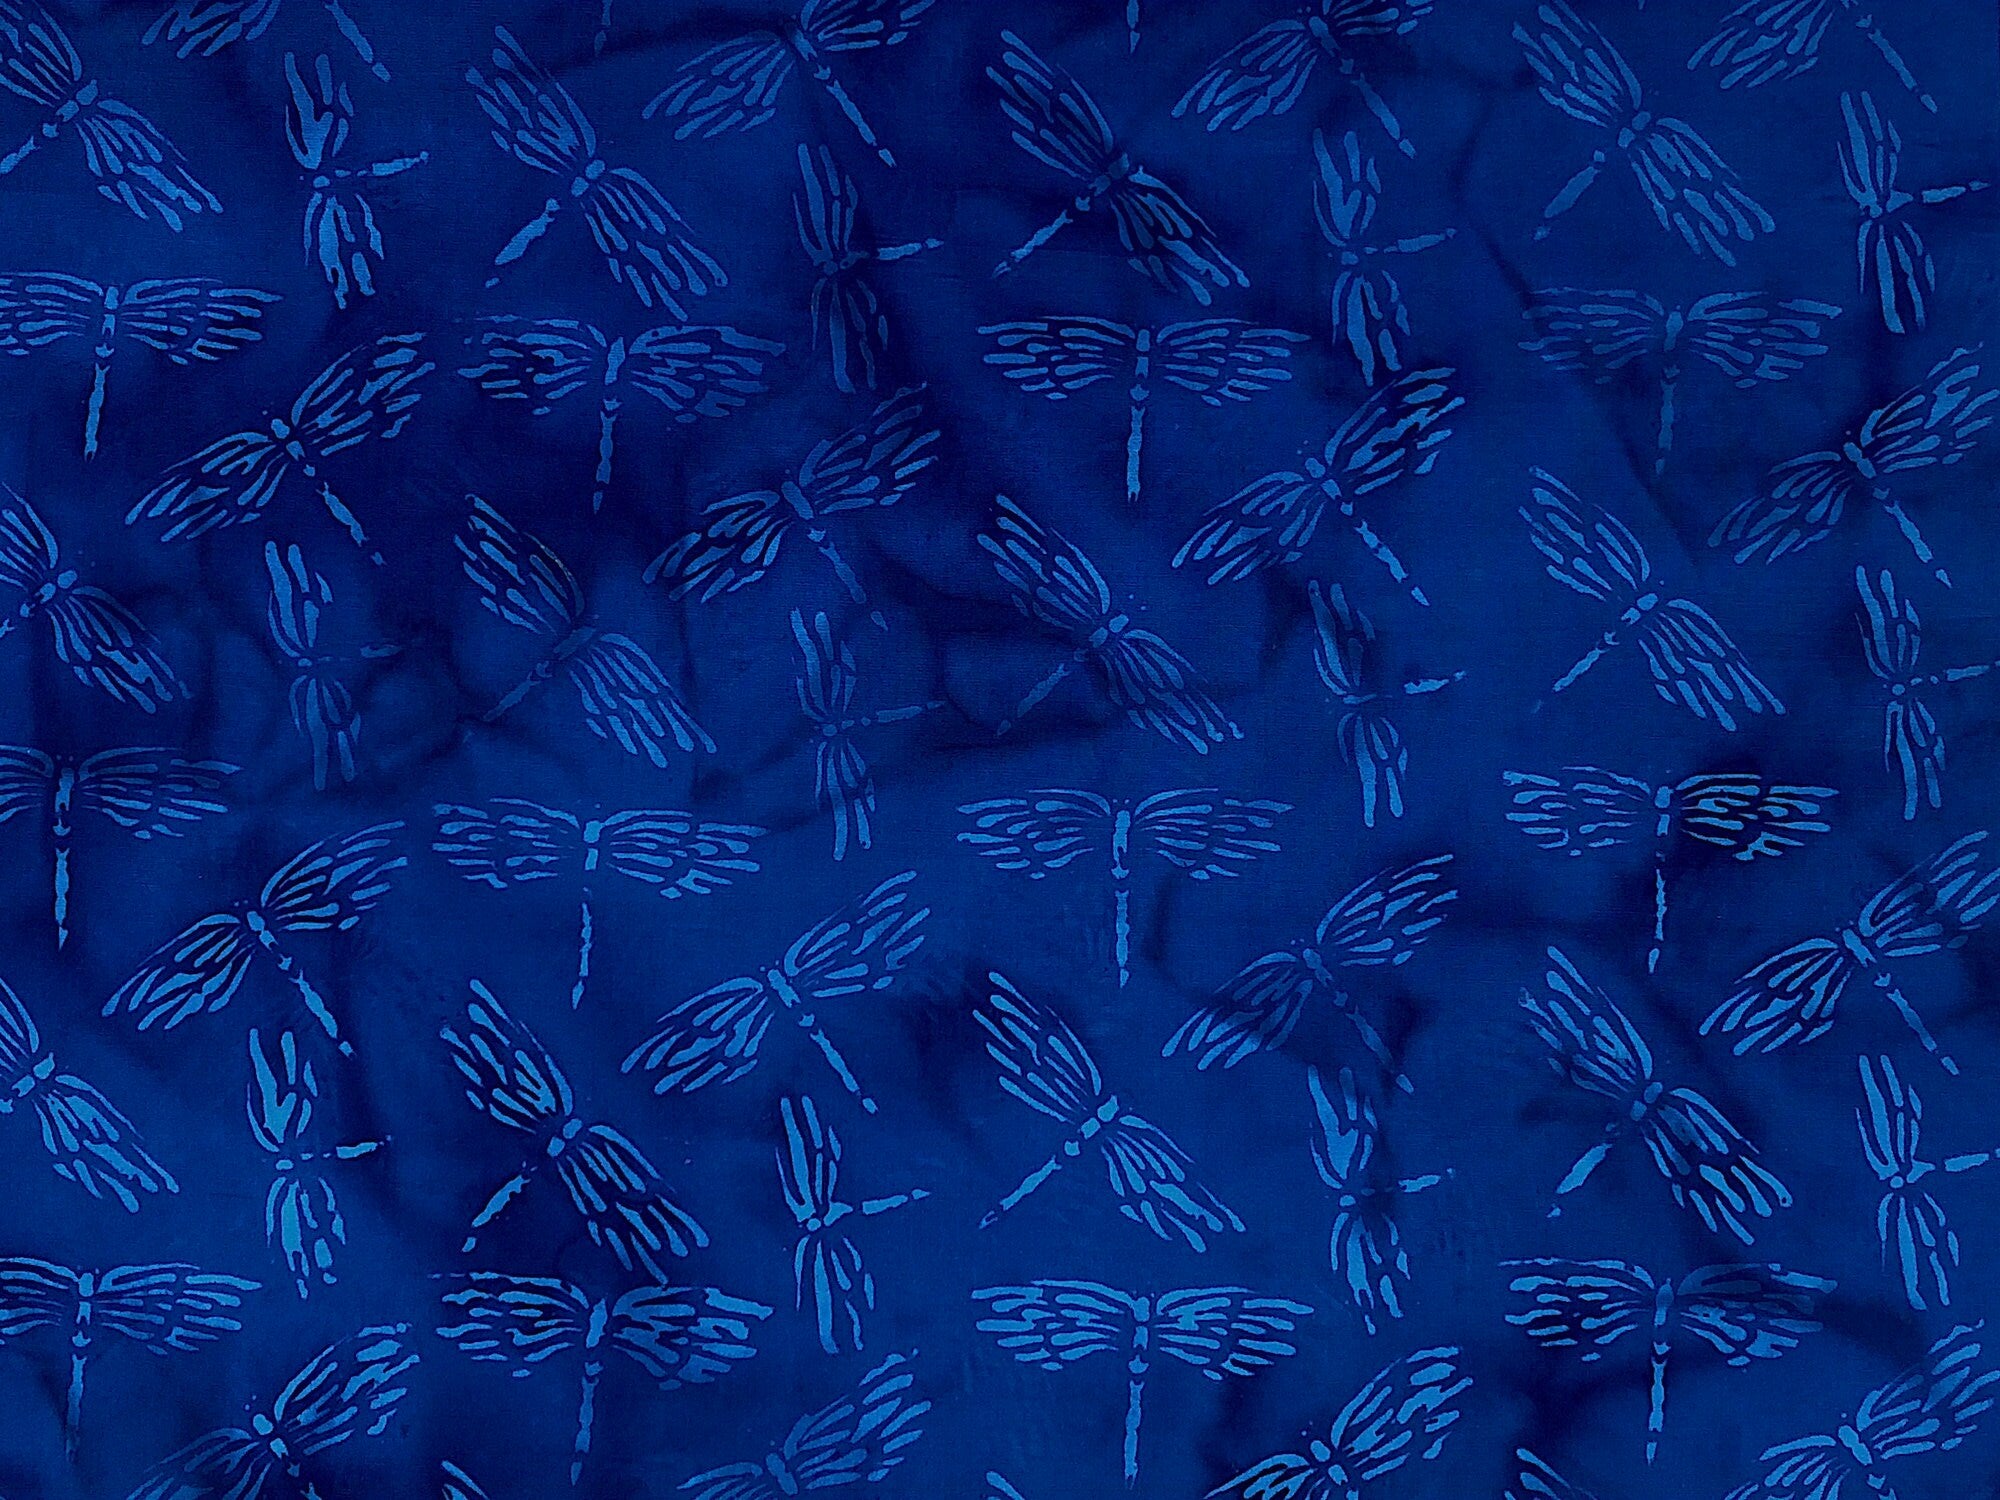 Blue batik fabric covered with dragonflies.